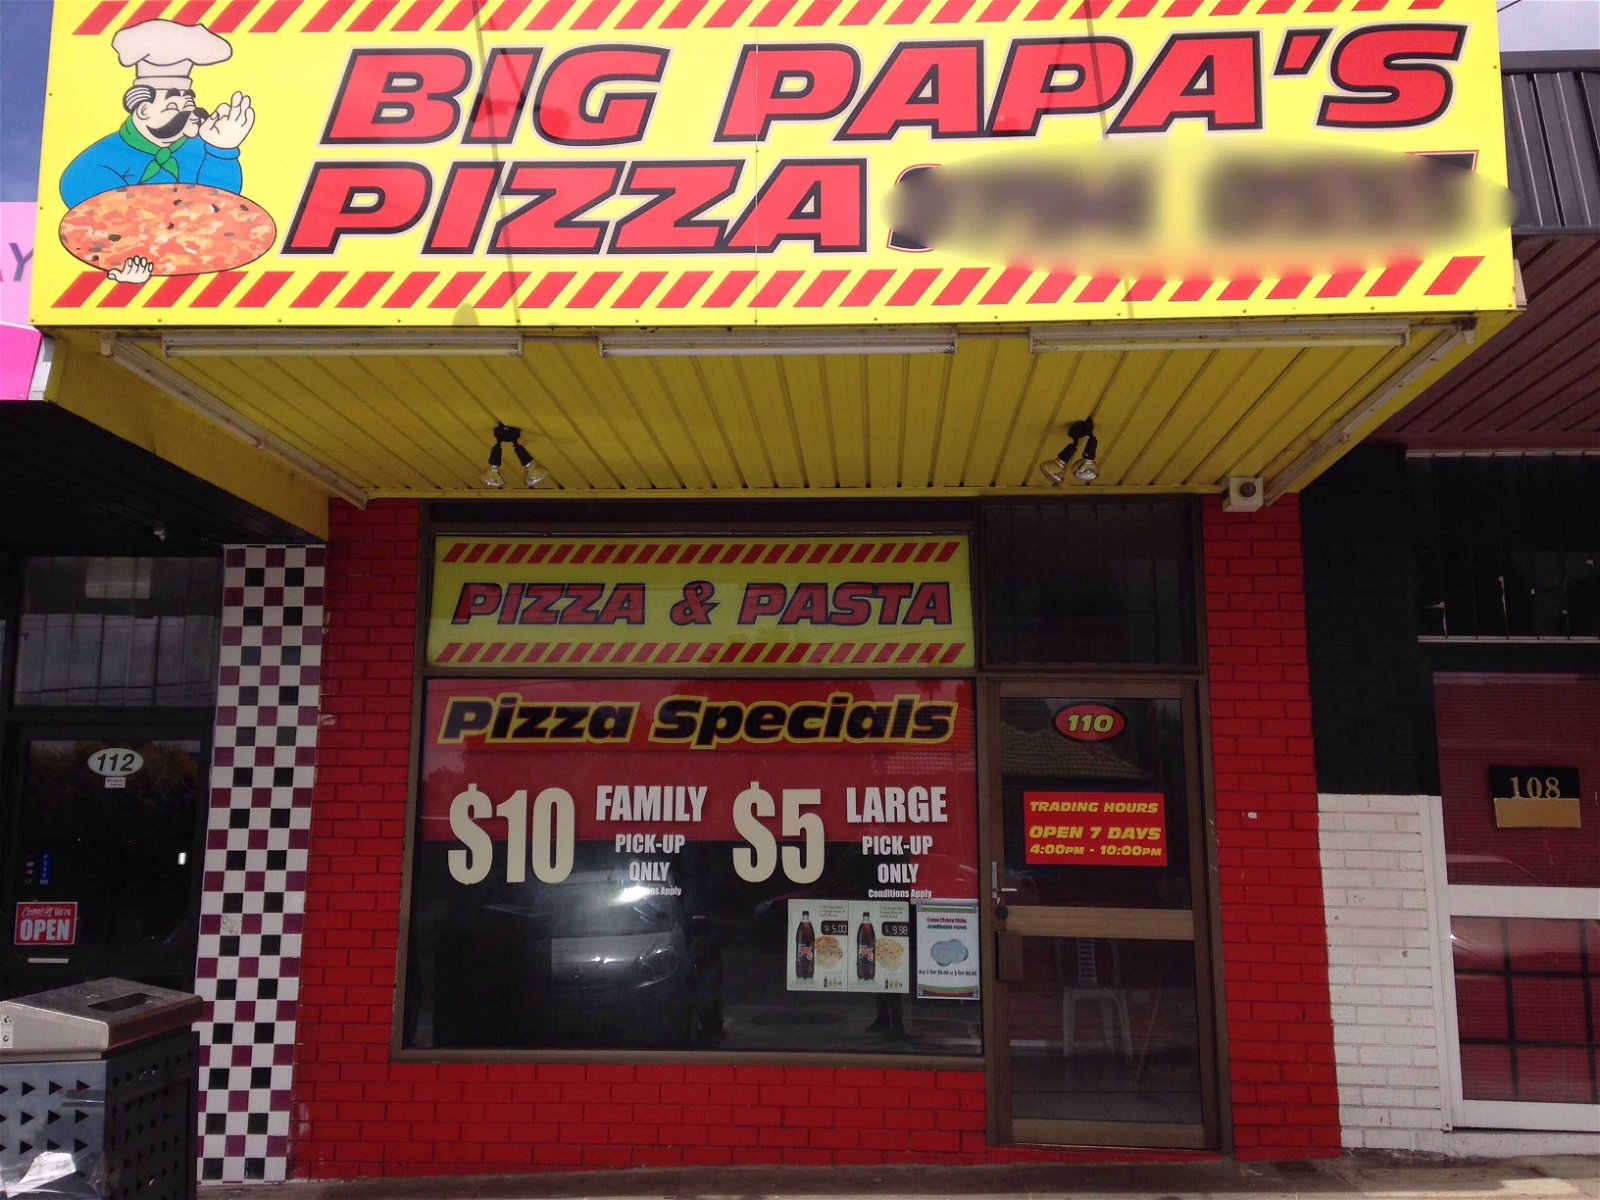 Big Pappa's Pizza - New South Wales Tourism 